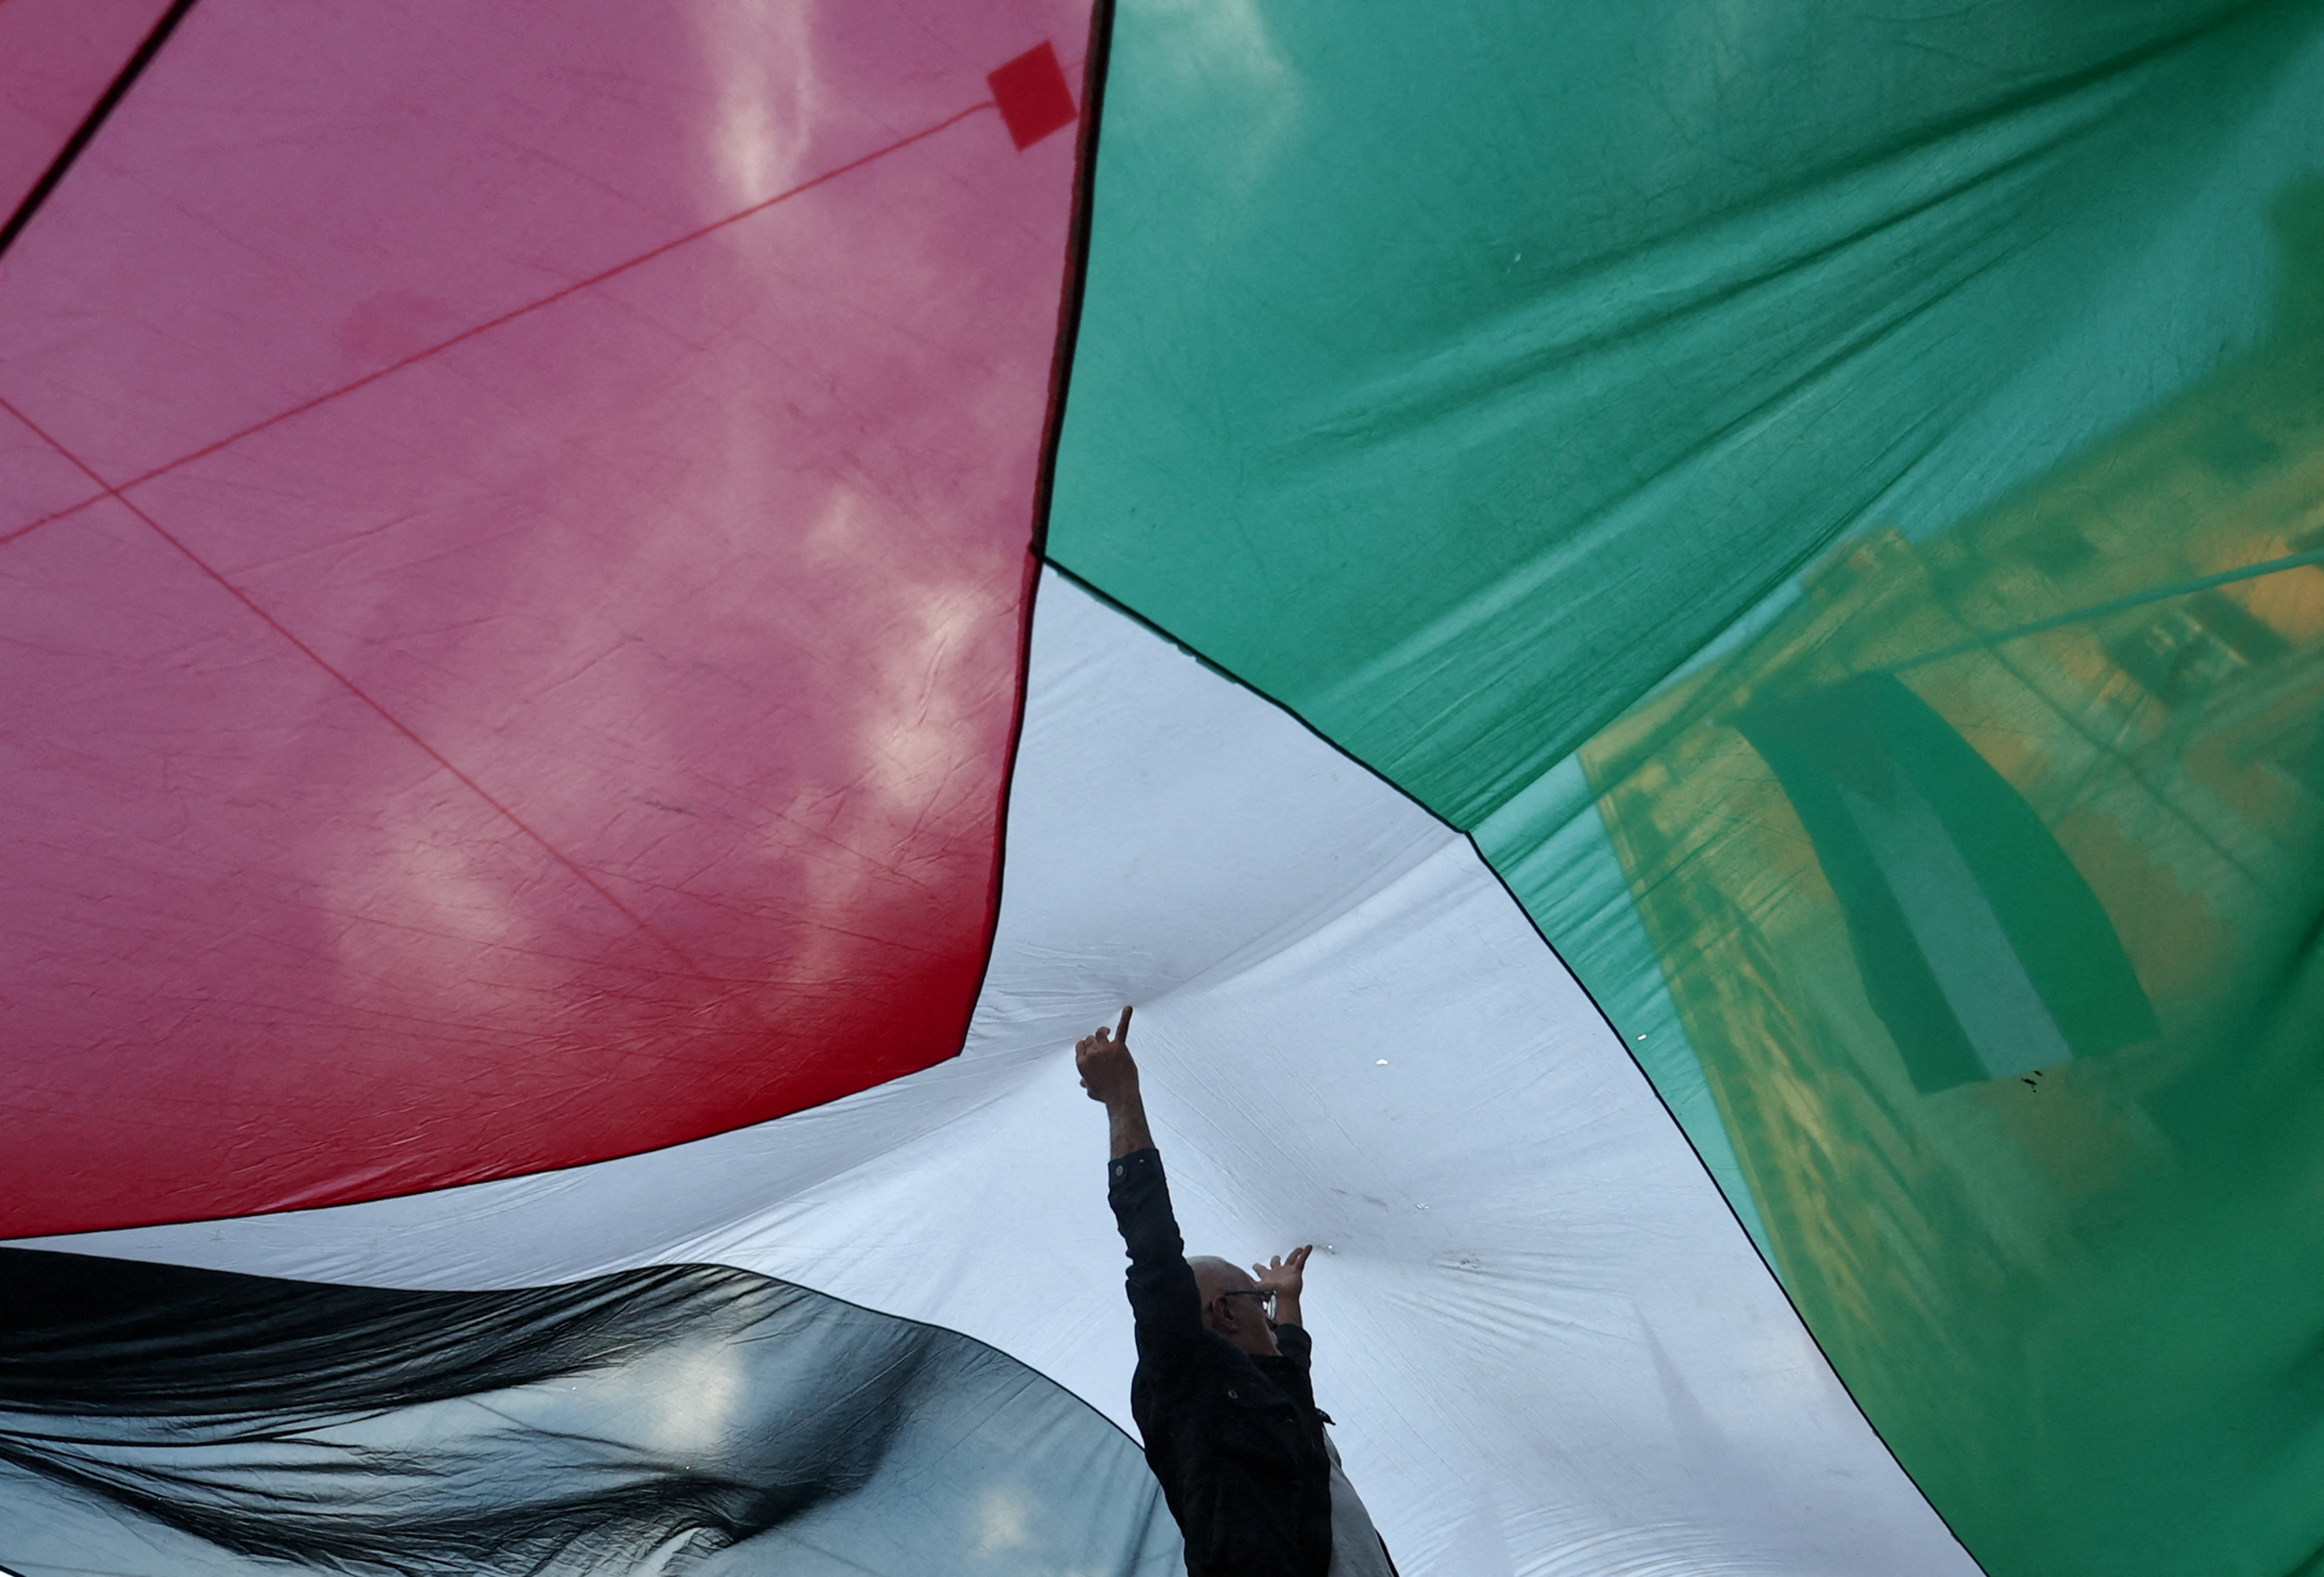 Demonstration to express support for Palestinians in Rome